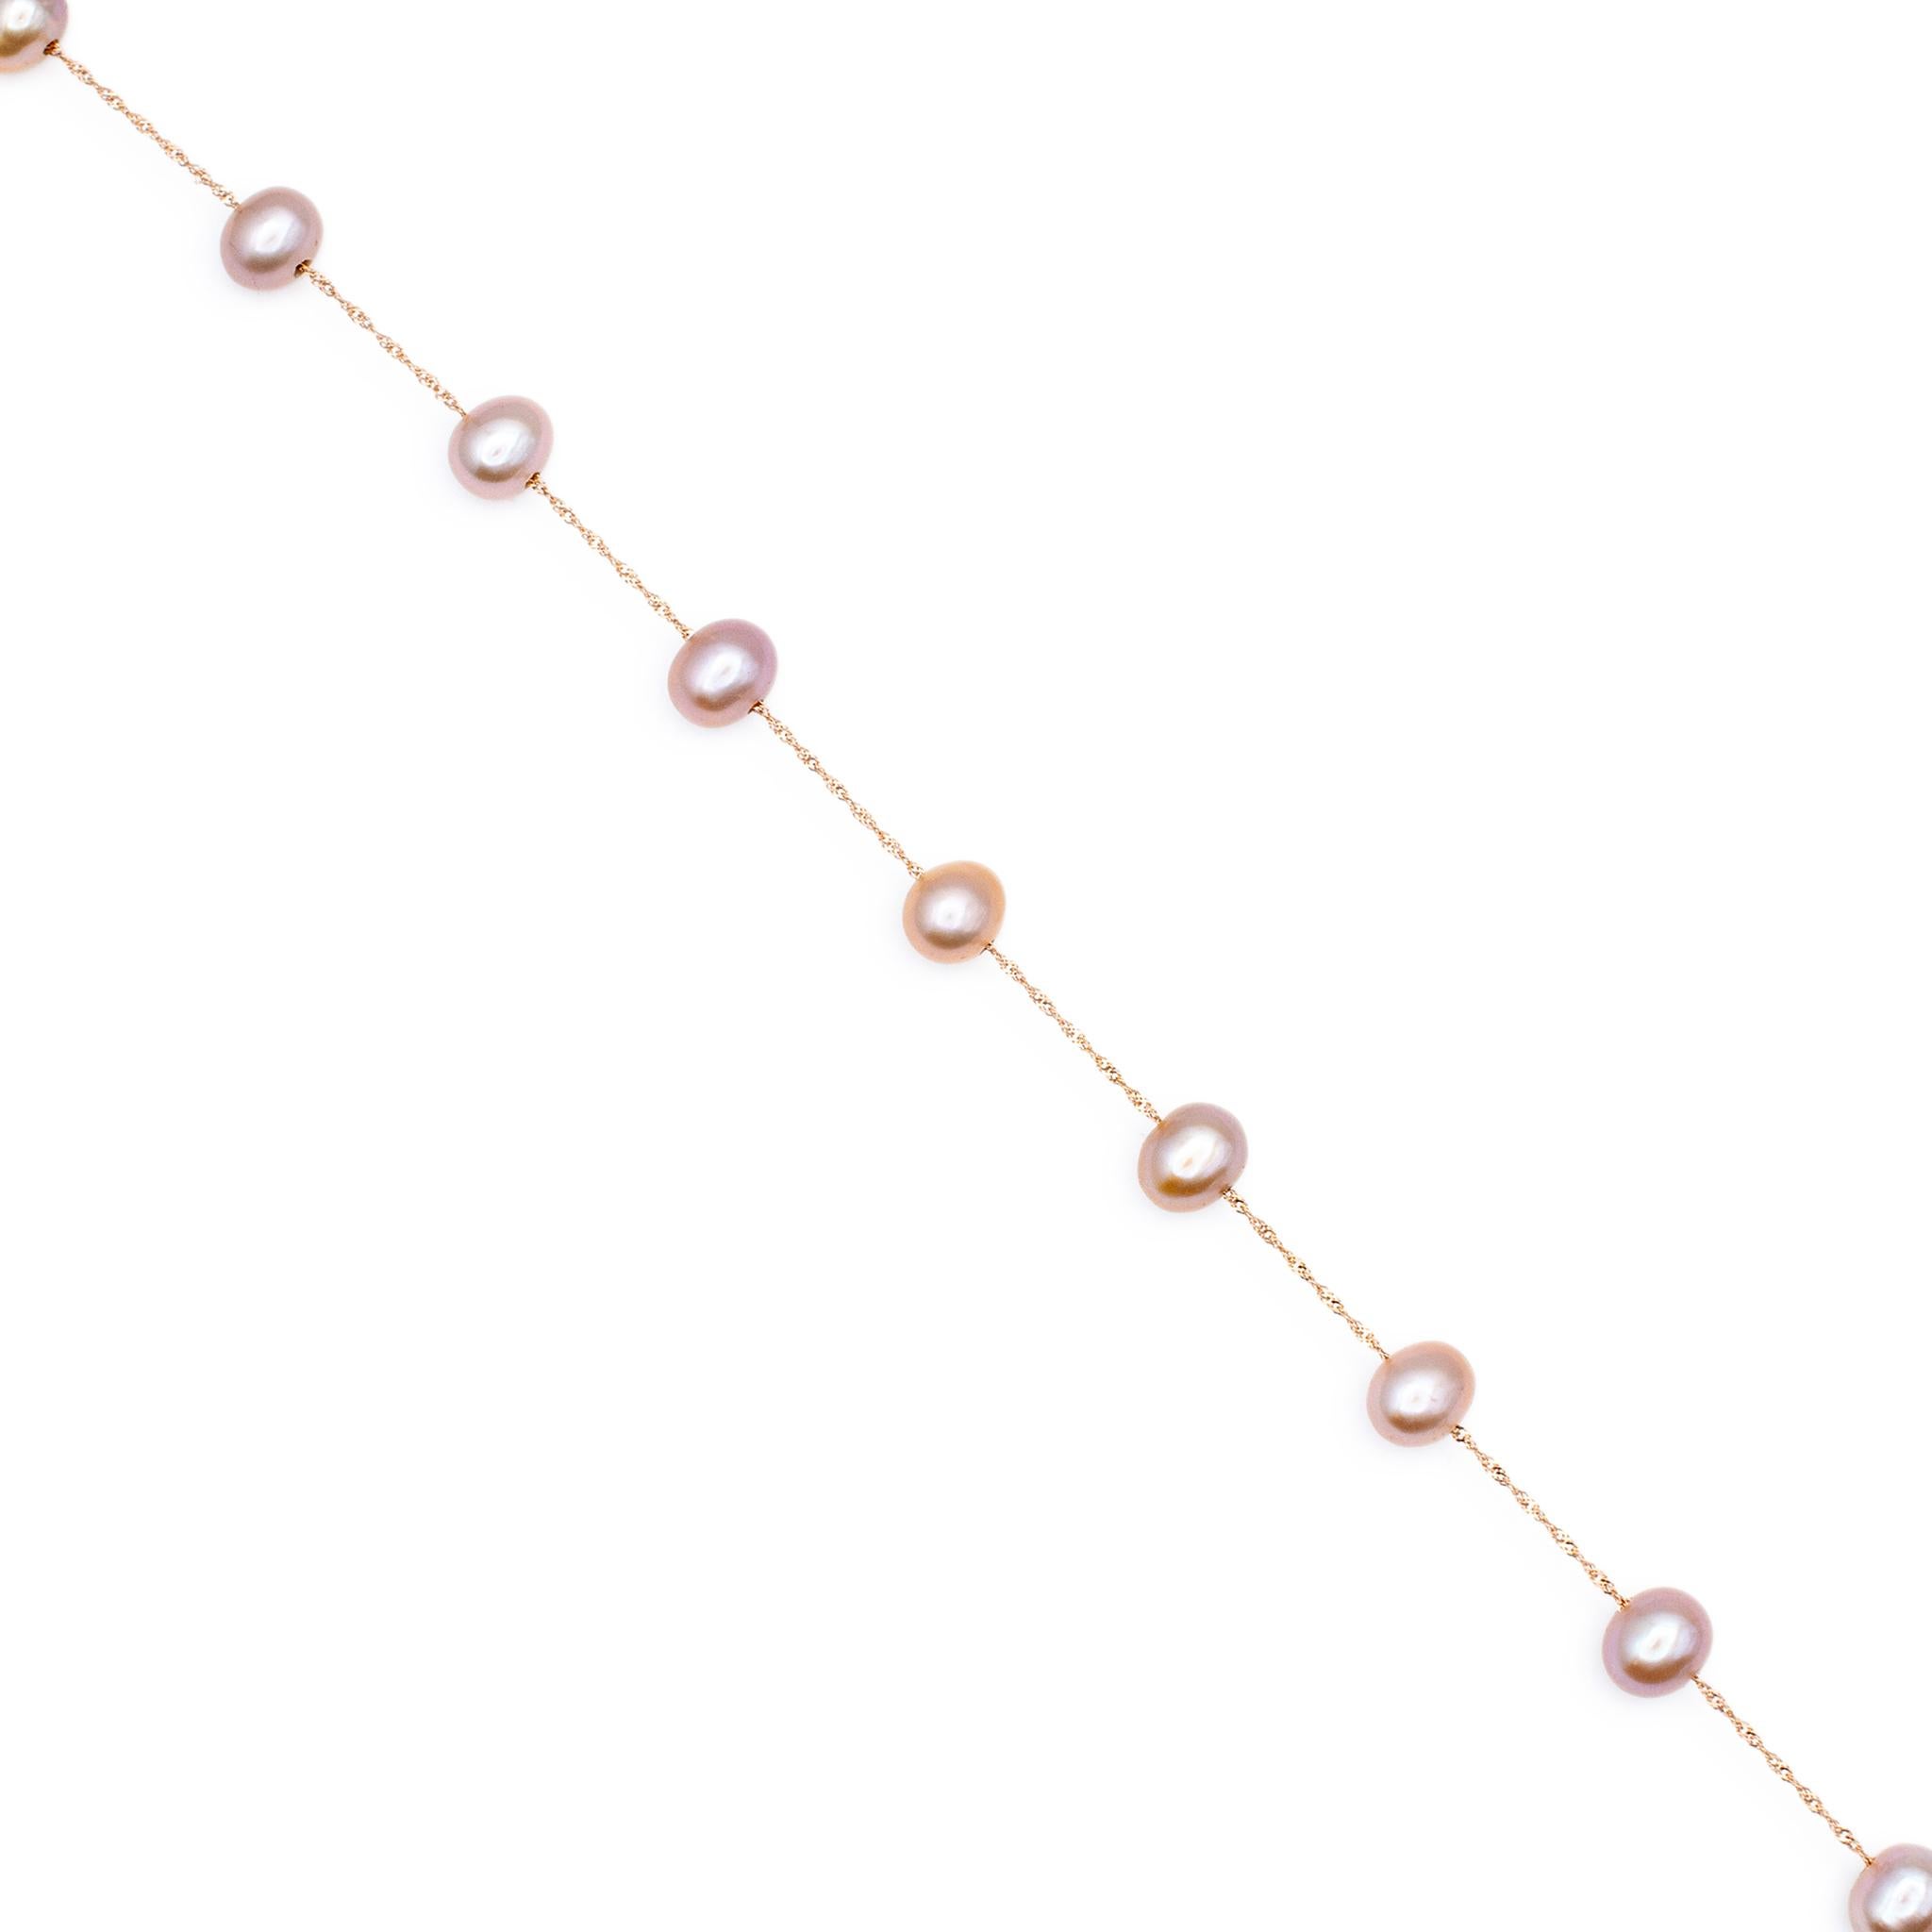 Brand: Effy

Gender: Ladies

Metal Type: 14K Rose Gold

Length: 18.00 inches

Weight: 7.11 grams.

Lady's designer made 14K rose gold single strand, pearl station necklace. Engraved with 